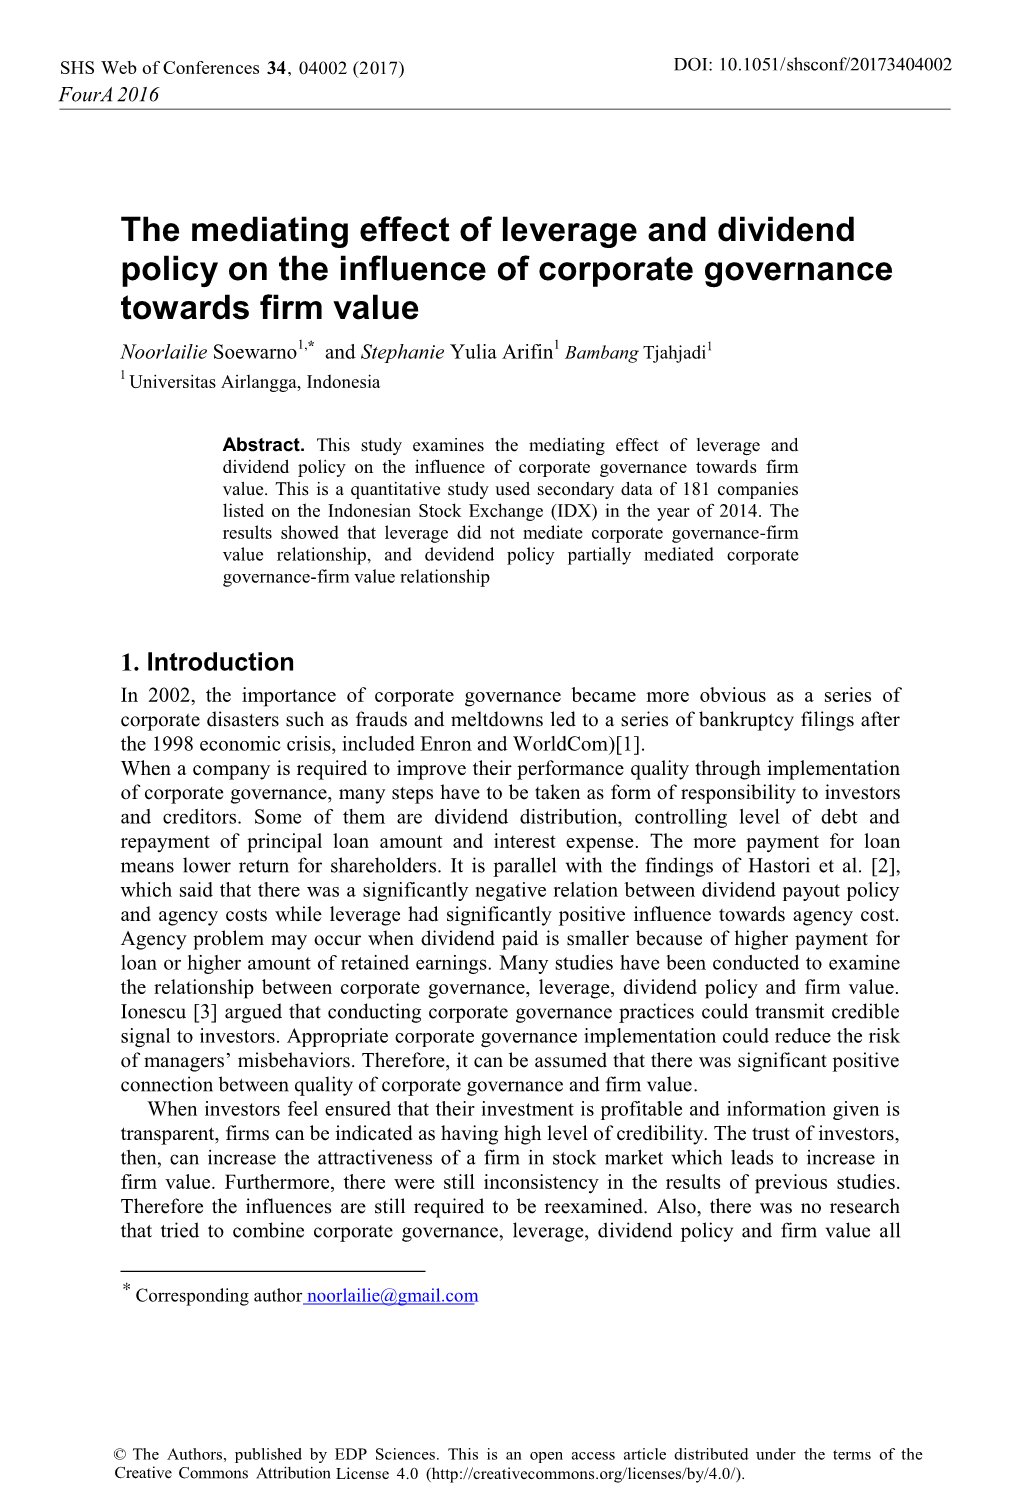 The Mediating Effect of Leverage and Dividend Policy on the Influence Of